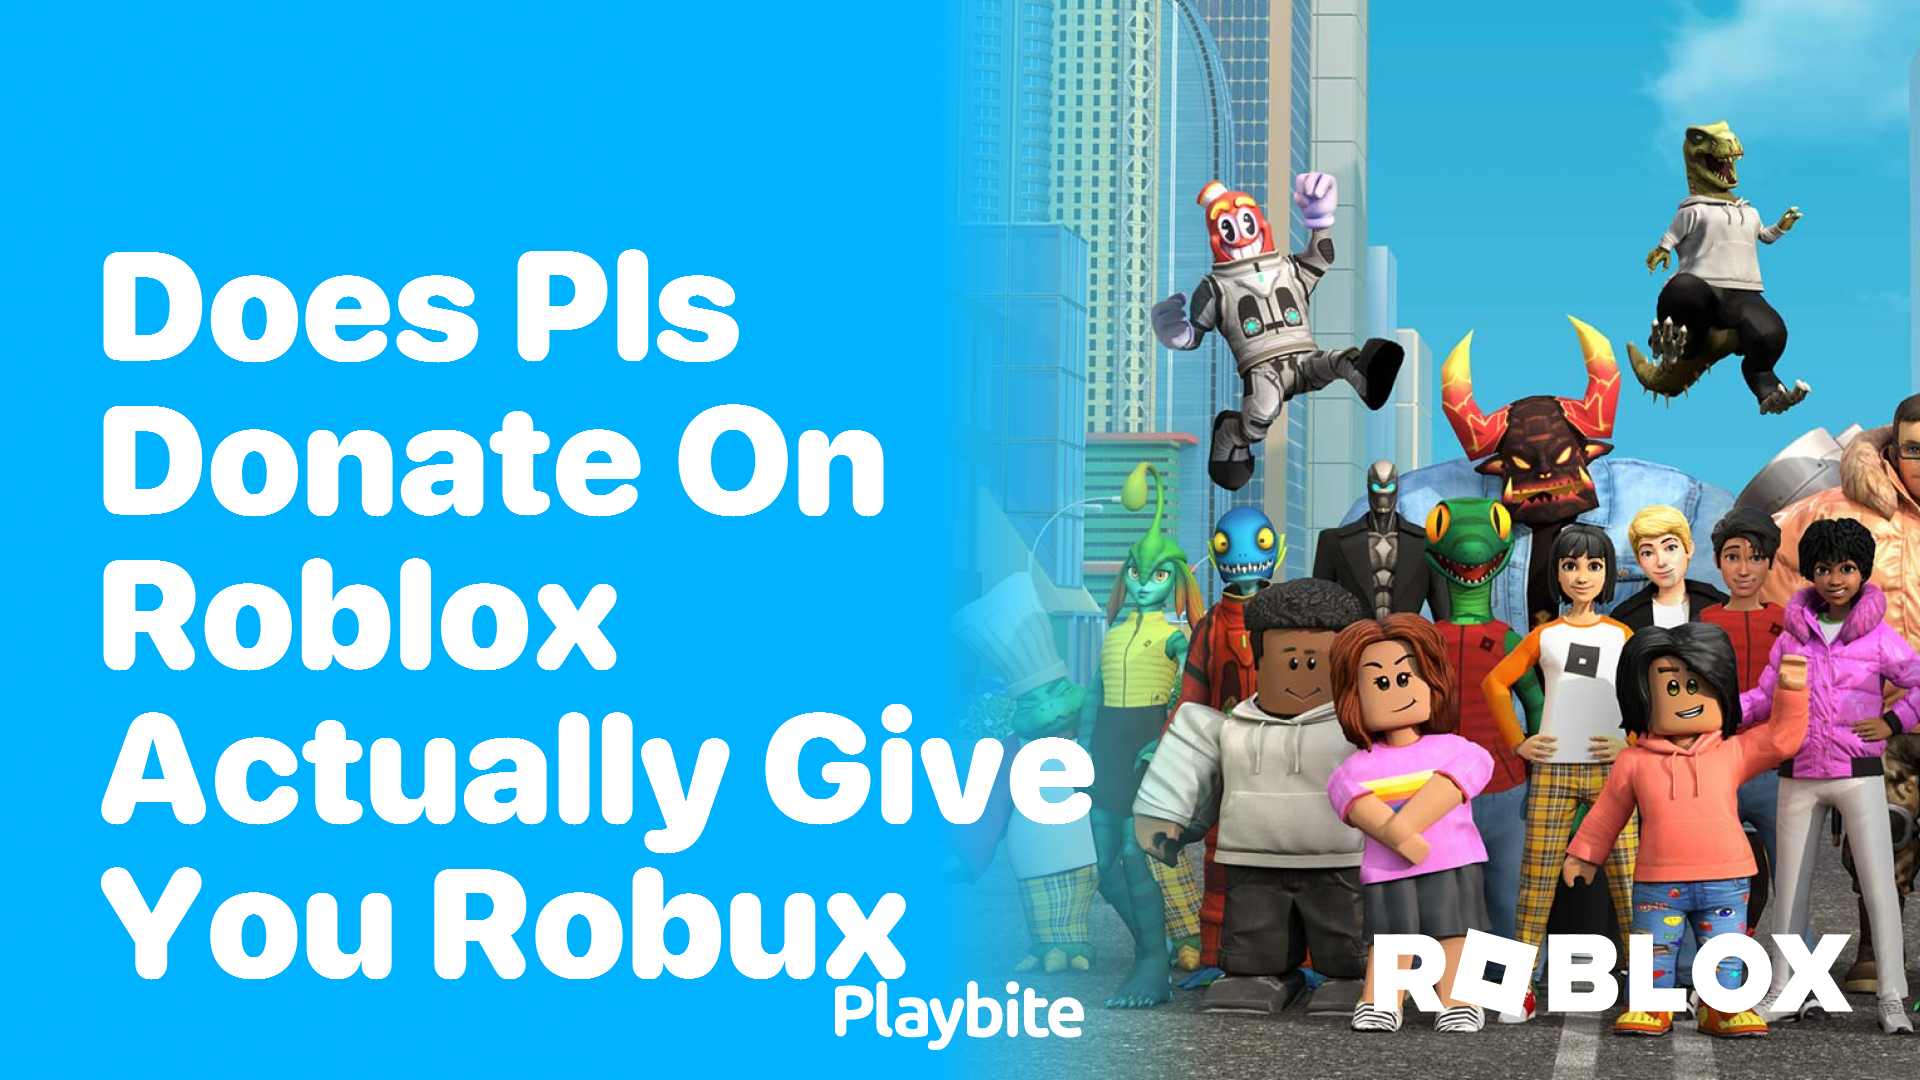 Does 'Pls Donate' on Roblox Actually Give You Robux? - Playbite